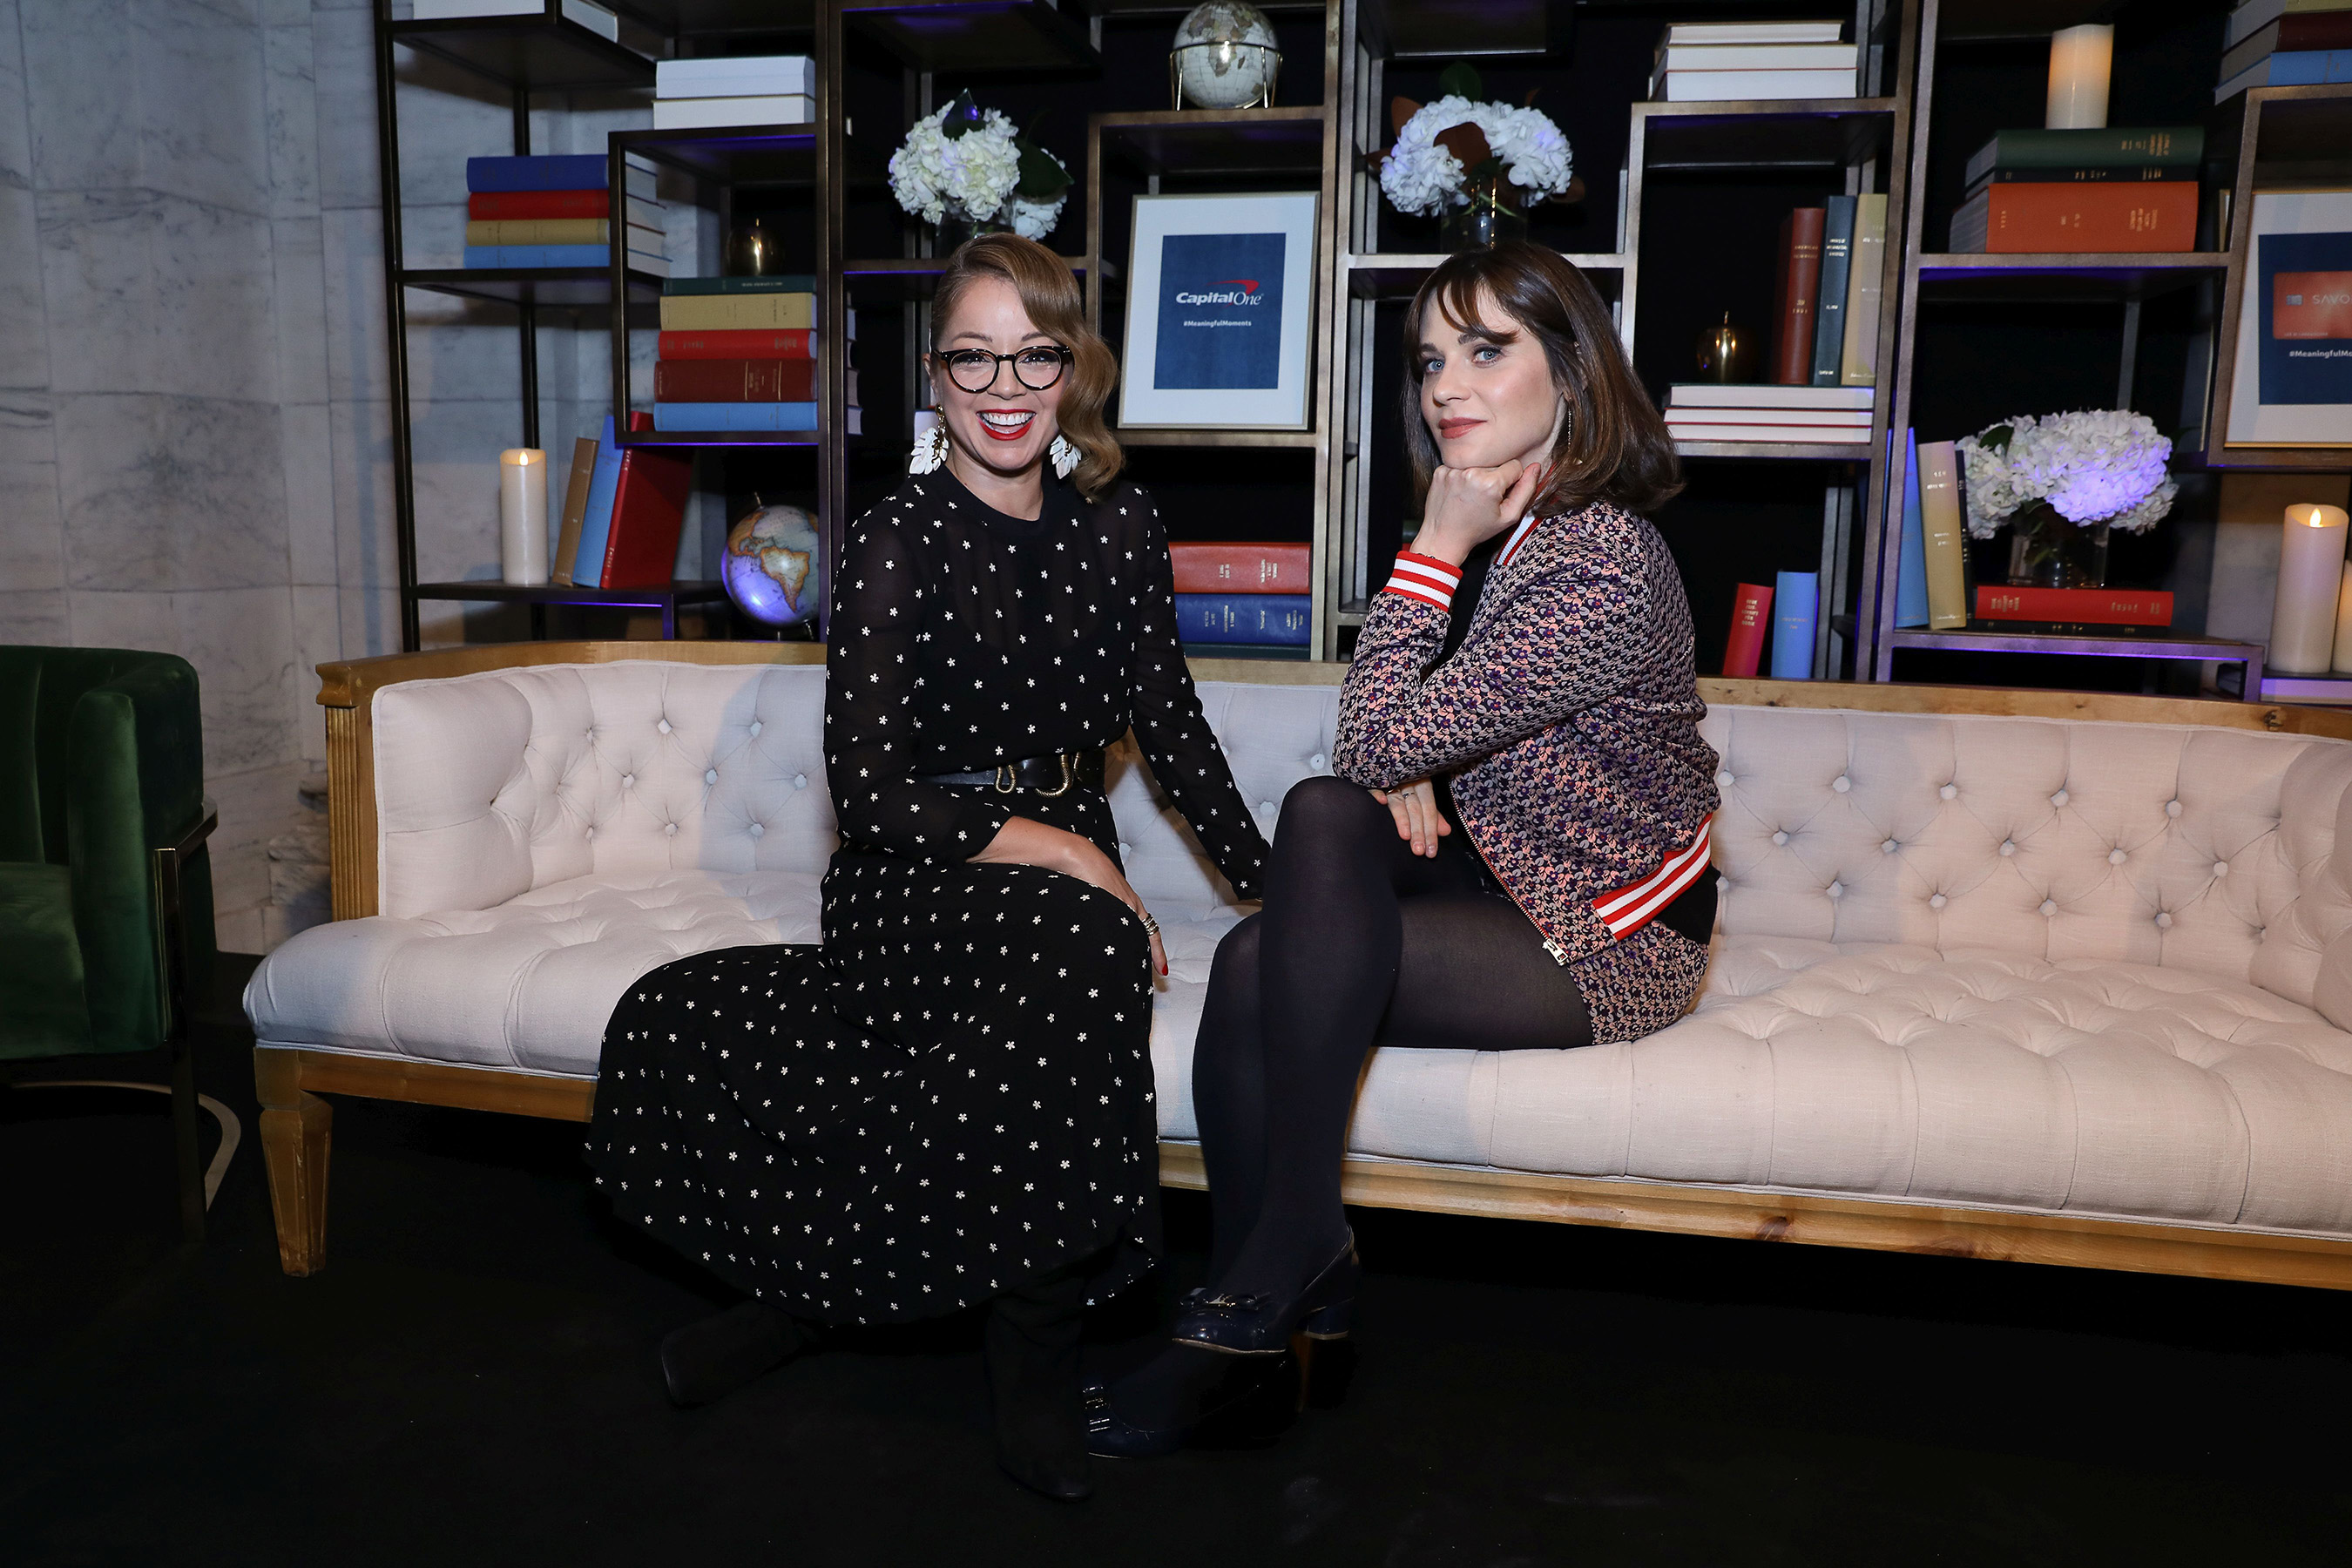 Marcela Valladolid and Zooey Deschanel join the discussion on purposeful travel at a launch event for the Purpose Project(SM) by Capital One® on Wednesday, October 24, 2018 in New York.(Mark Von Holden/AP Images for Capital One)